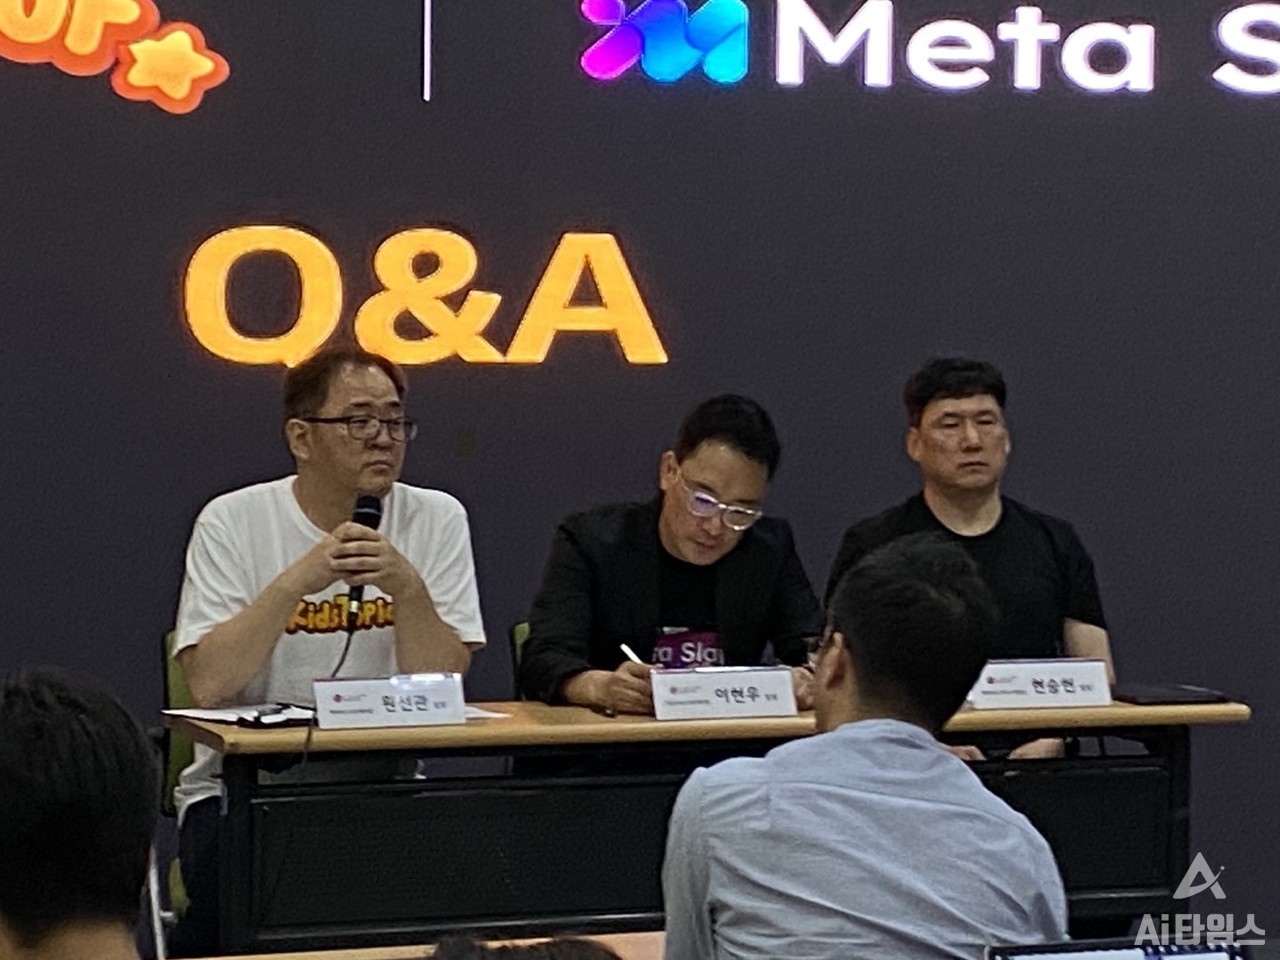 Won Seon-gwan, LGU+ Metabus Project Team Leader (from left), Lee Hyun-woo, Virtual Office Project Team Leader, and Hyun Seung-heon, Metaverse Service Development Team Manager, answer questions from reporters at the LG U+ Metabus Demonstration held at the Center Point Building in Jongno-gu, Seoul. 